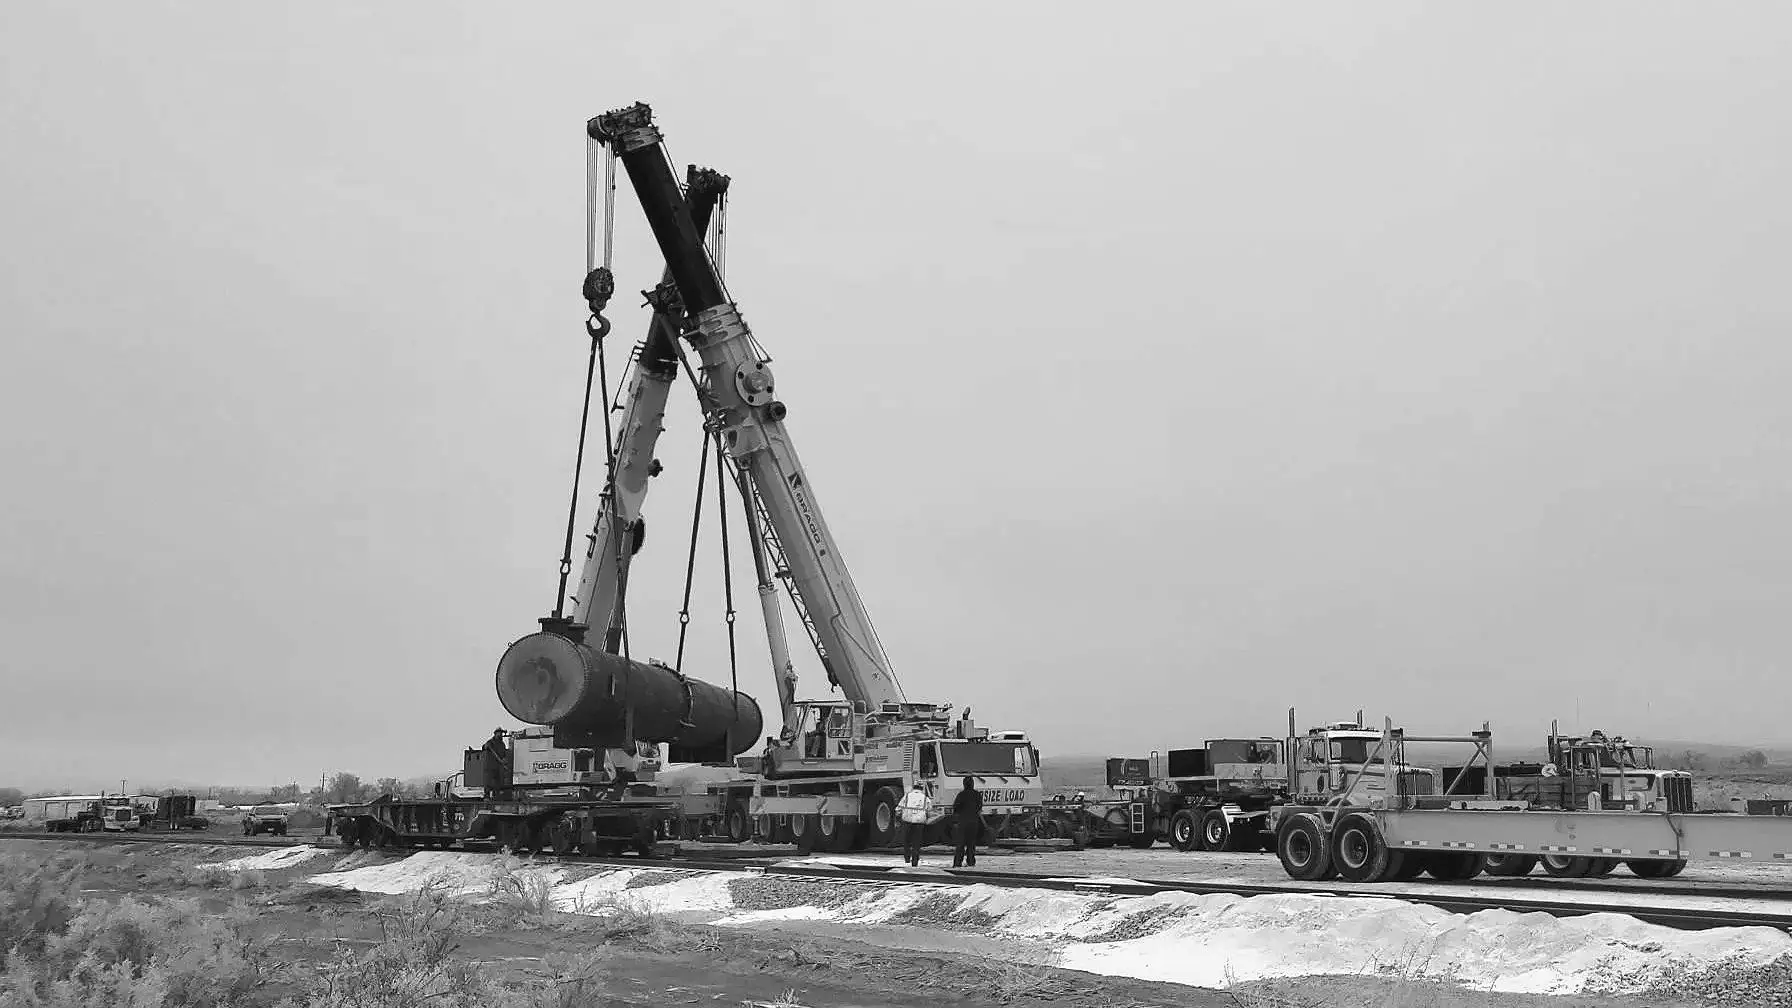 A large crane is lifting a pipe.